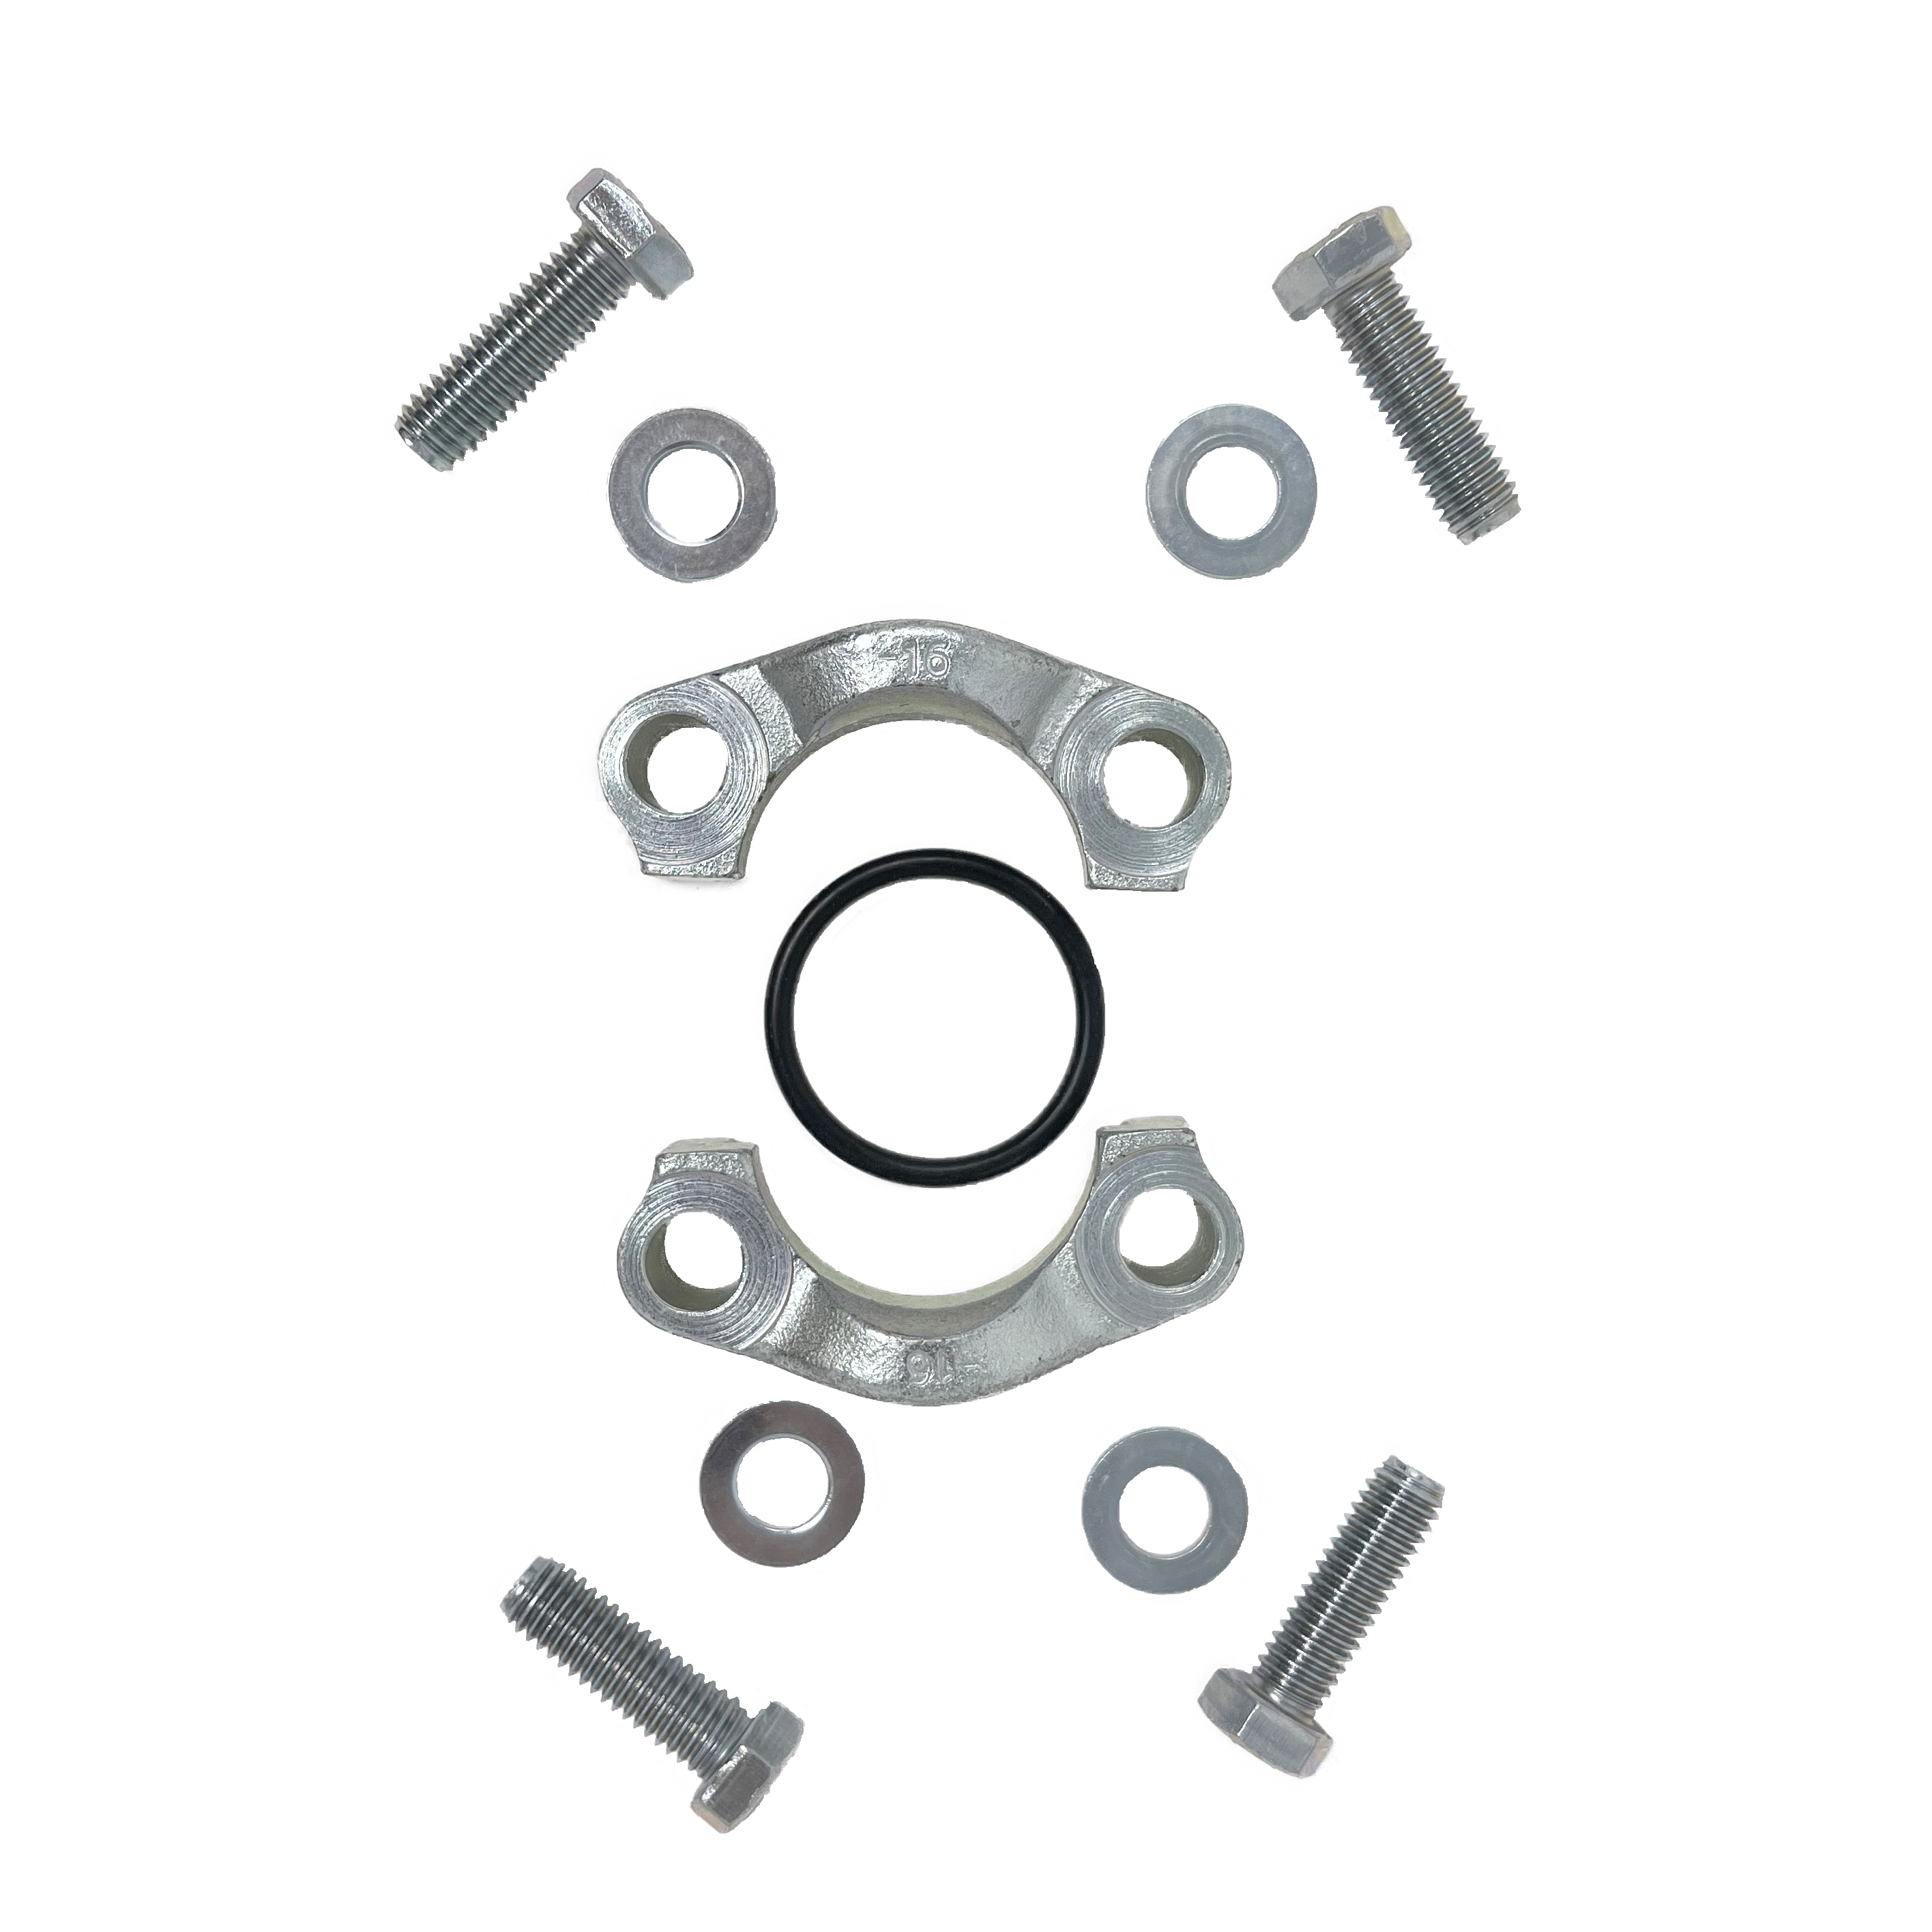 20SFO : AFP Split Flange Kit, Steel, 1.25" Code 61, 3000psi, Includes two (2) halves, four (4) bolts, four (4) washers, and one (1) O-Ring